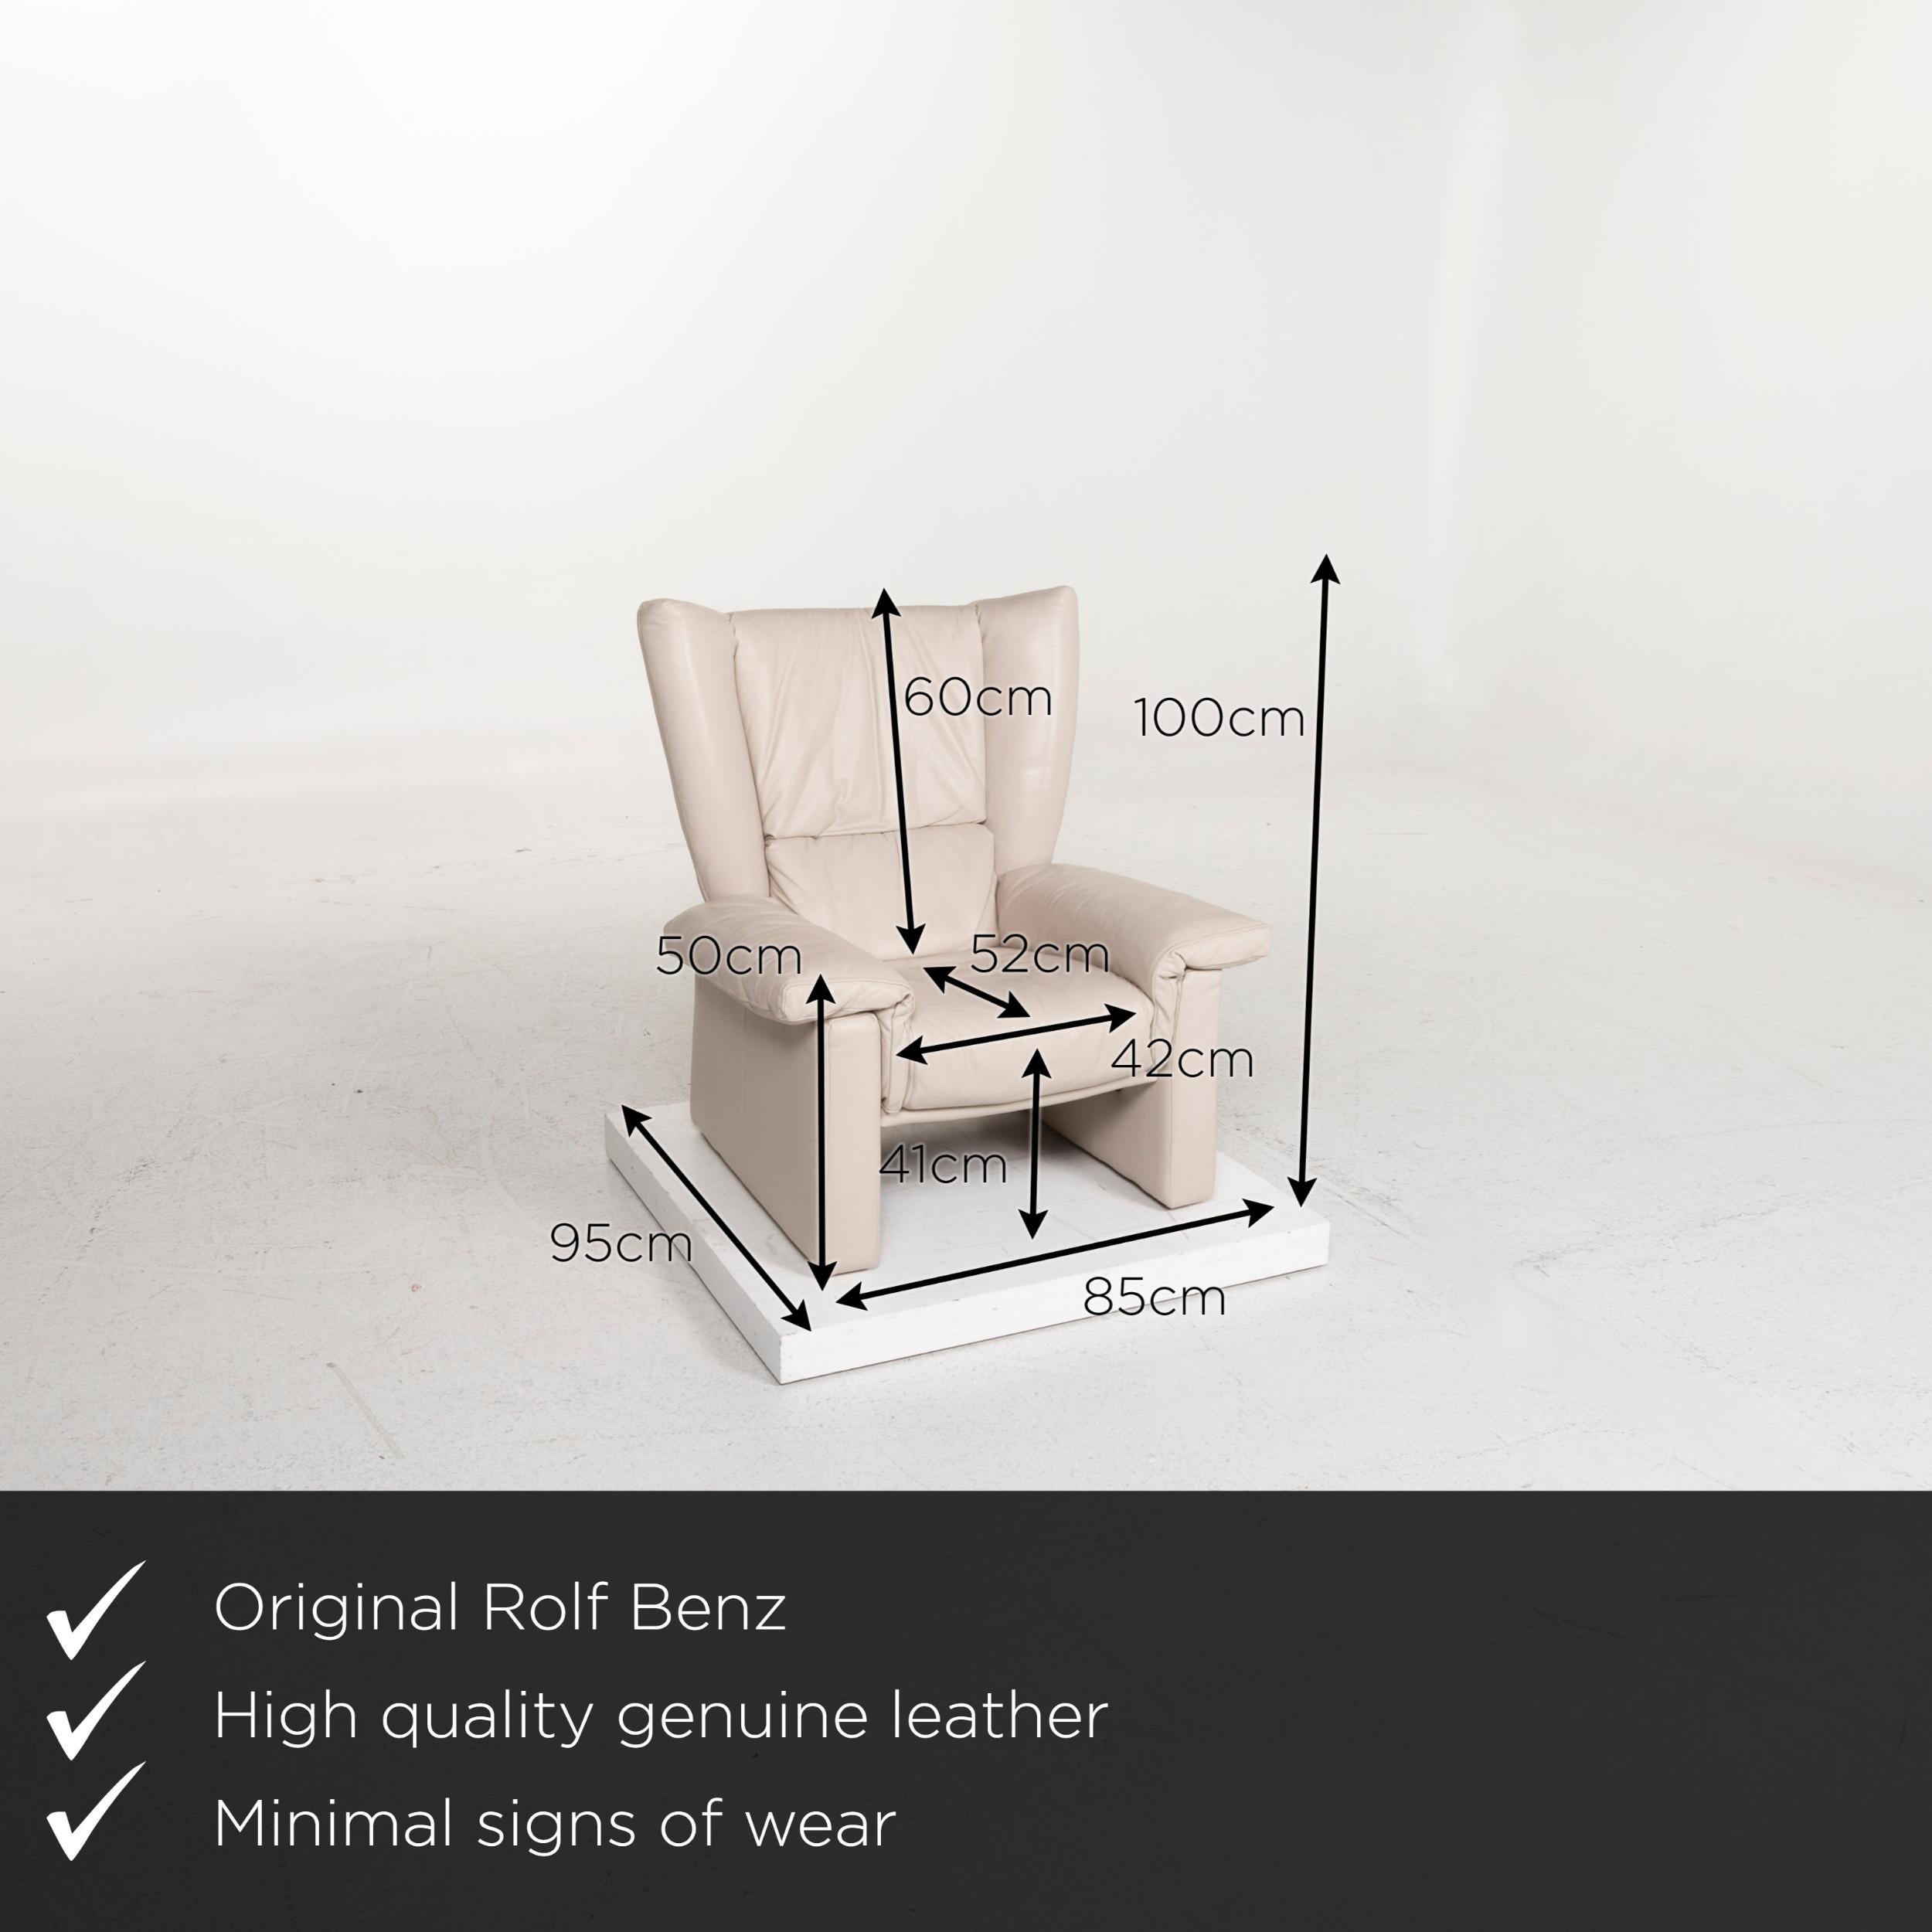 We present to you a Rolf Benz leather armchair gray.


 Product measurements in centimeters:
 

Depth 93
Width 85
Height 100
Seat height 41
Rest height 50
Seat depth 52
Seat width 42
Back height 60.

 